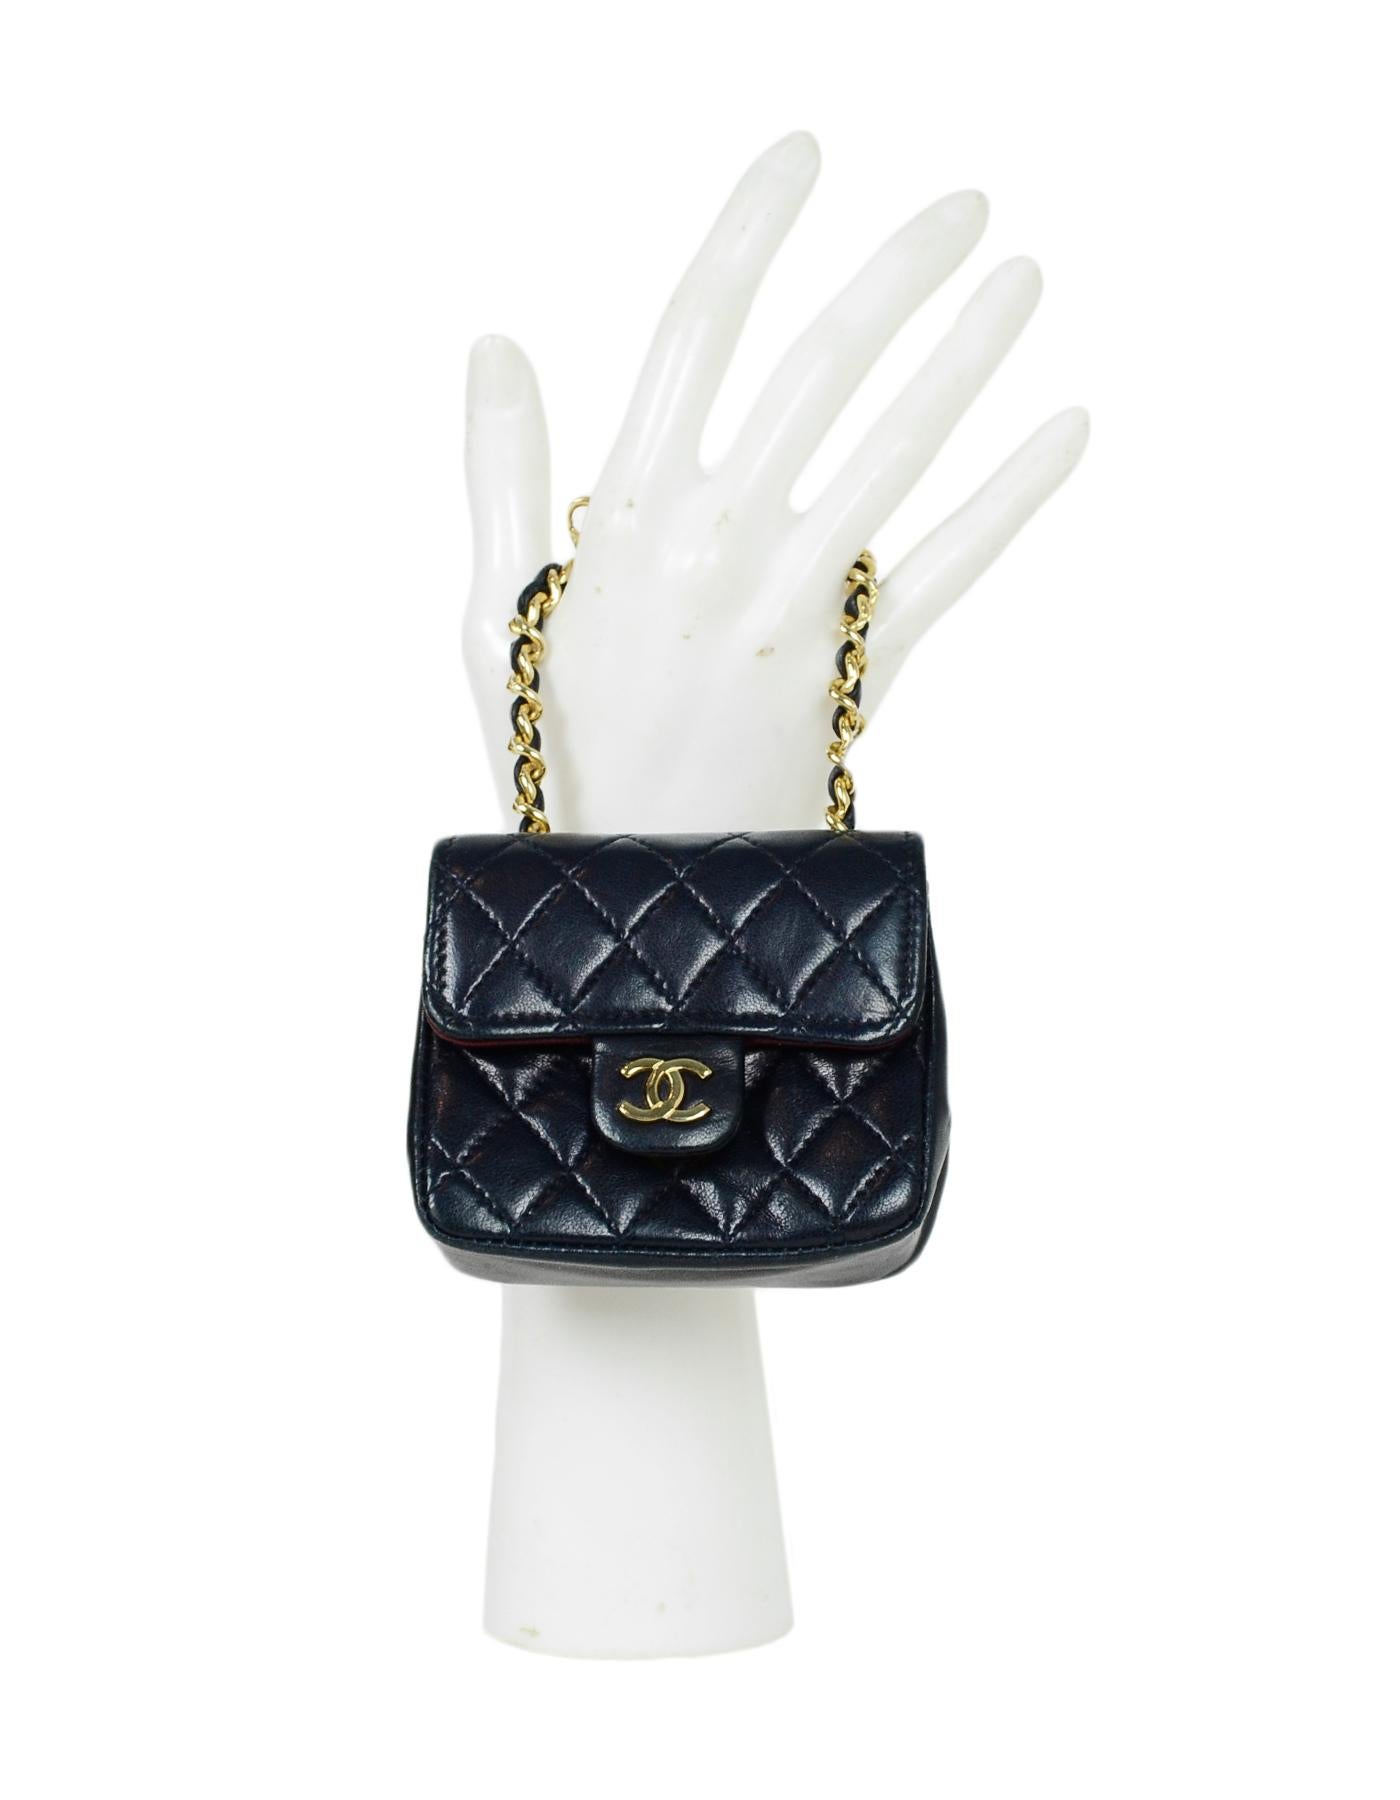 Chanel Navy Lambskin Quilted Micro Mini Flap Bag. This micro mini is to be worn as a belt or bag charm, or can be used as mini pouch to store money and coins. Please note, it is too small to hold credit cards or a phone.

Made In:France
Color: